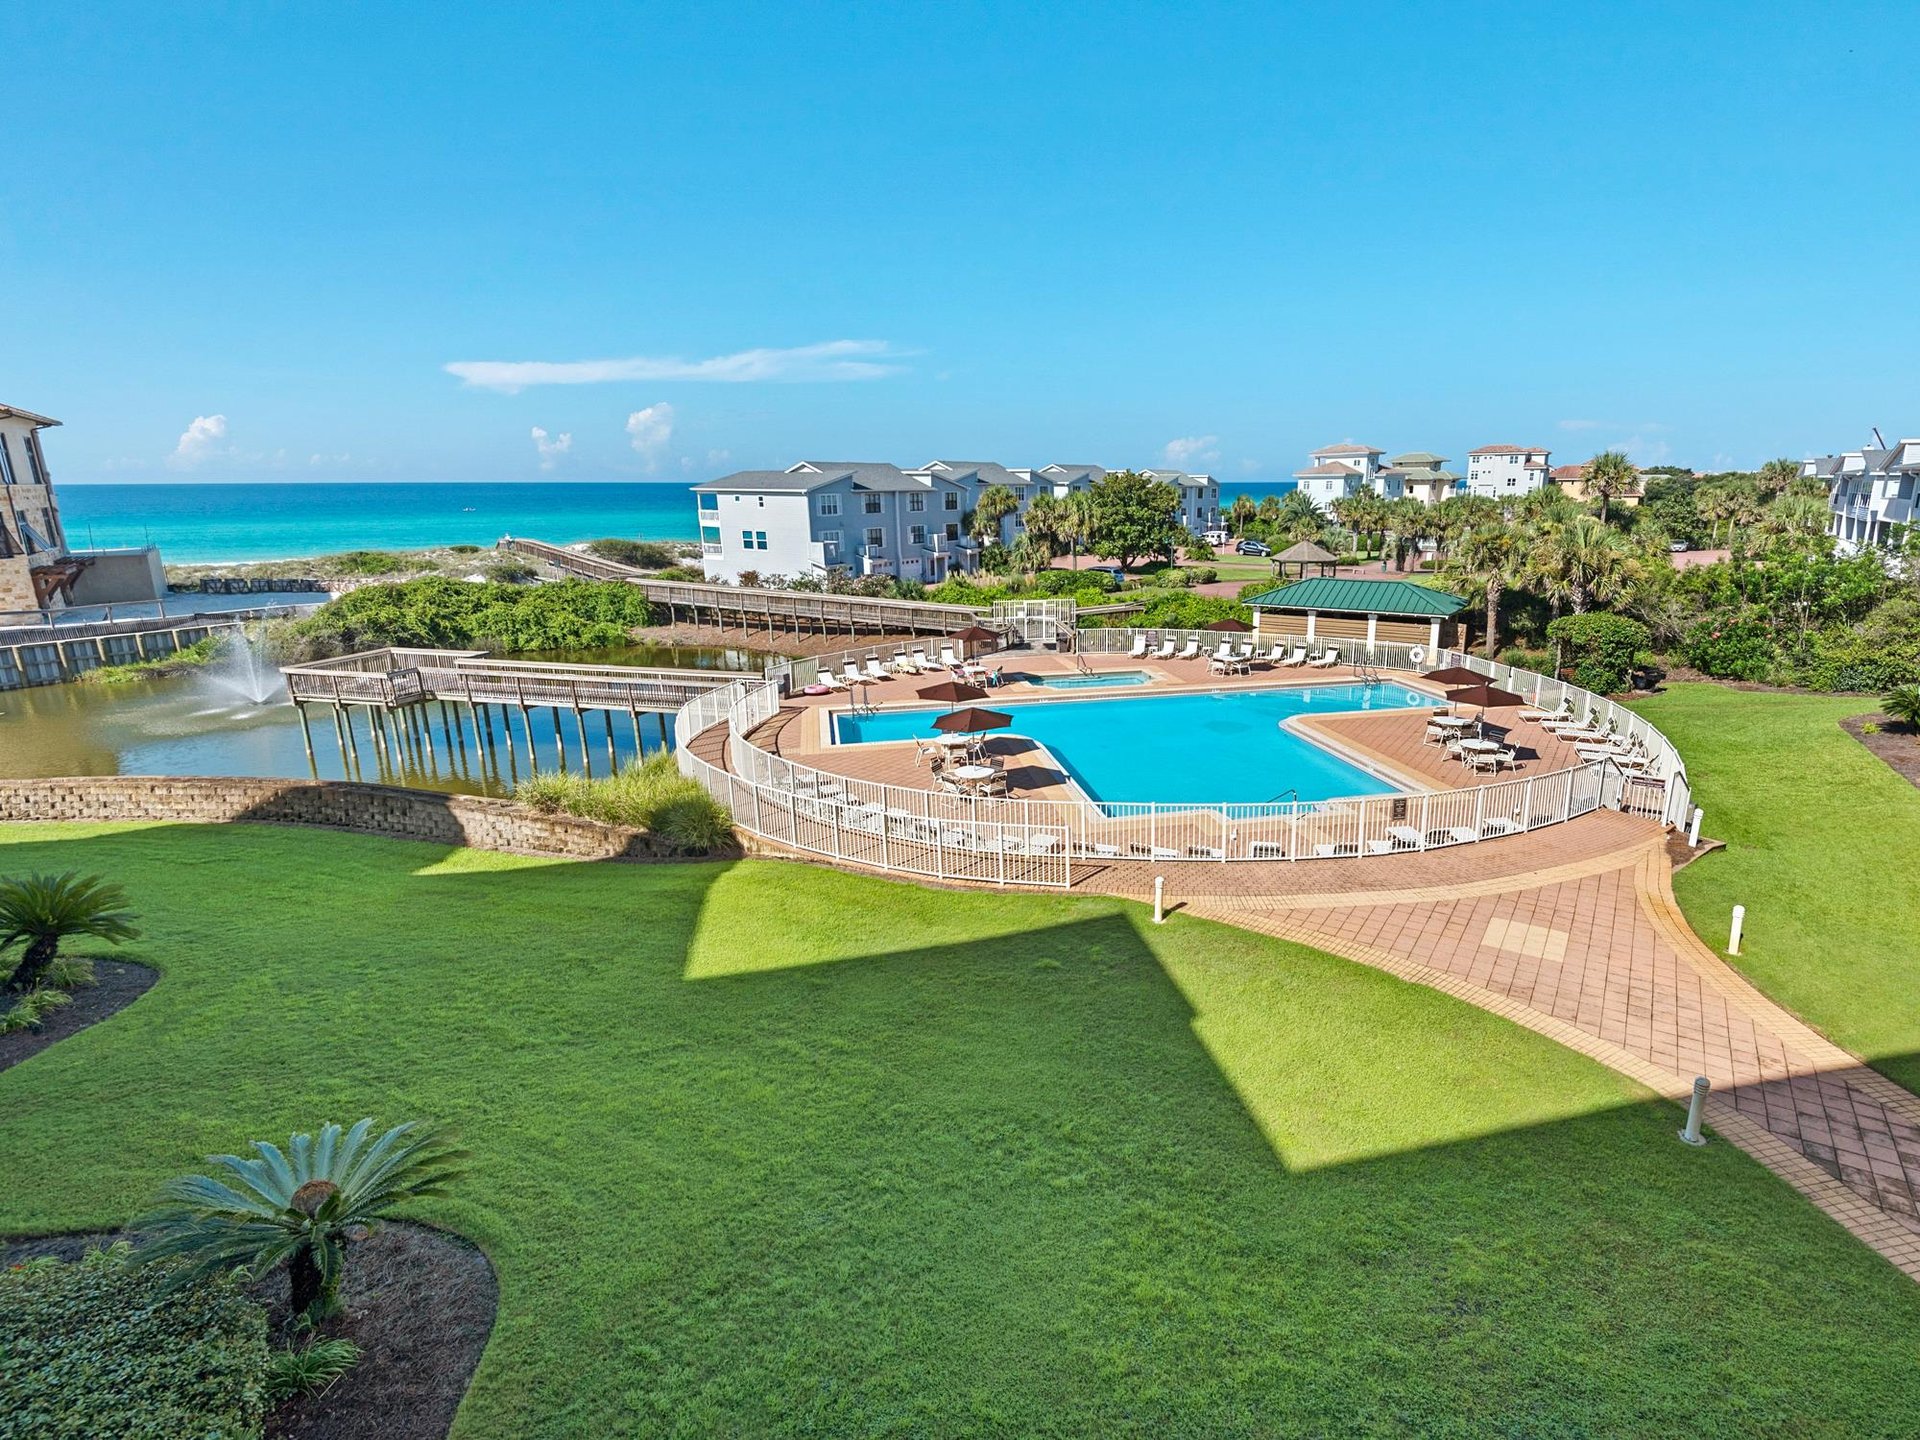 San Remo pool and beach access